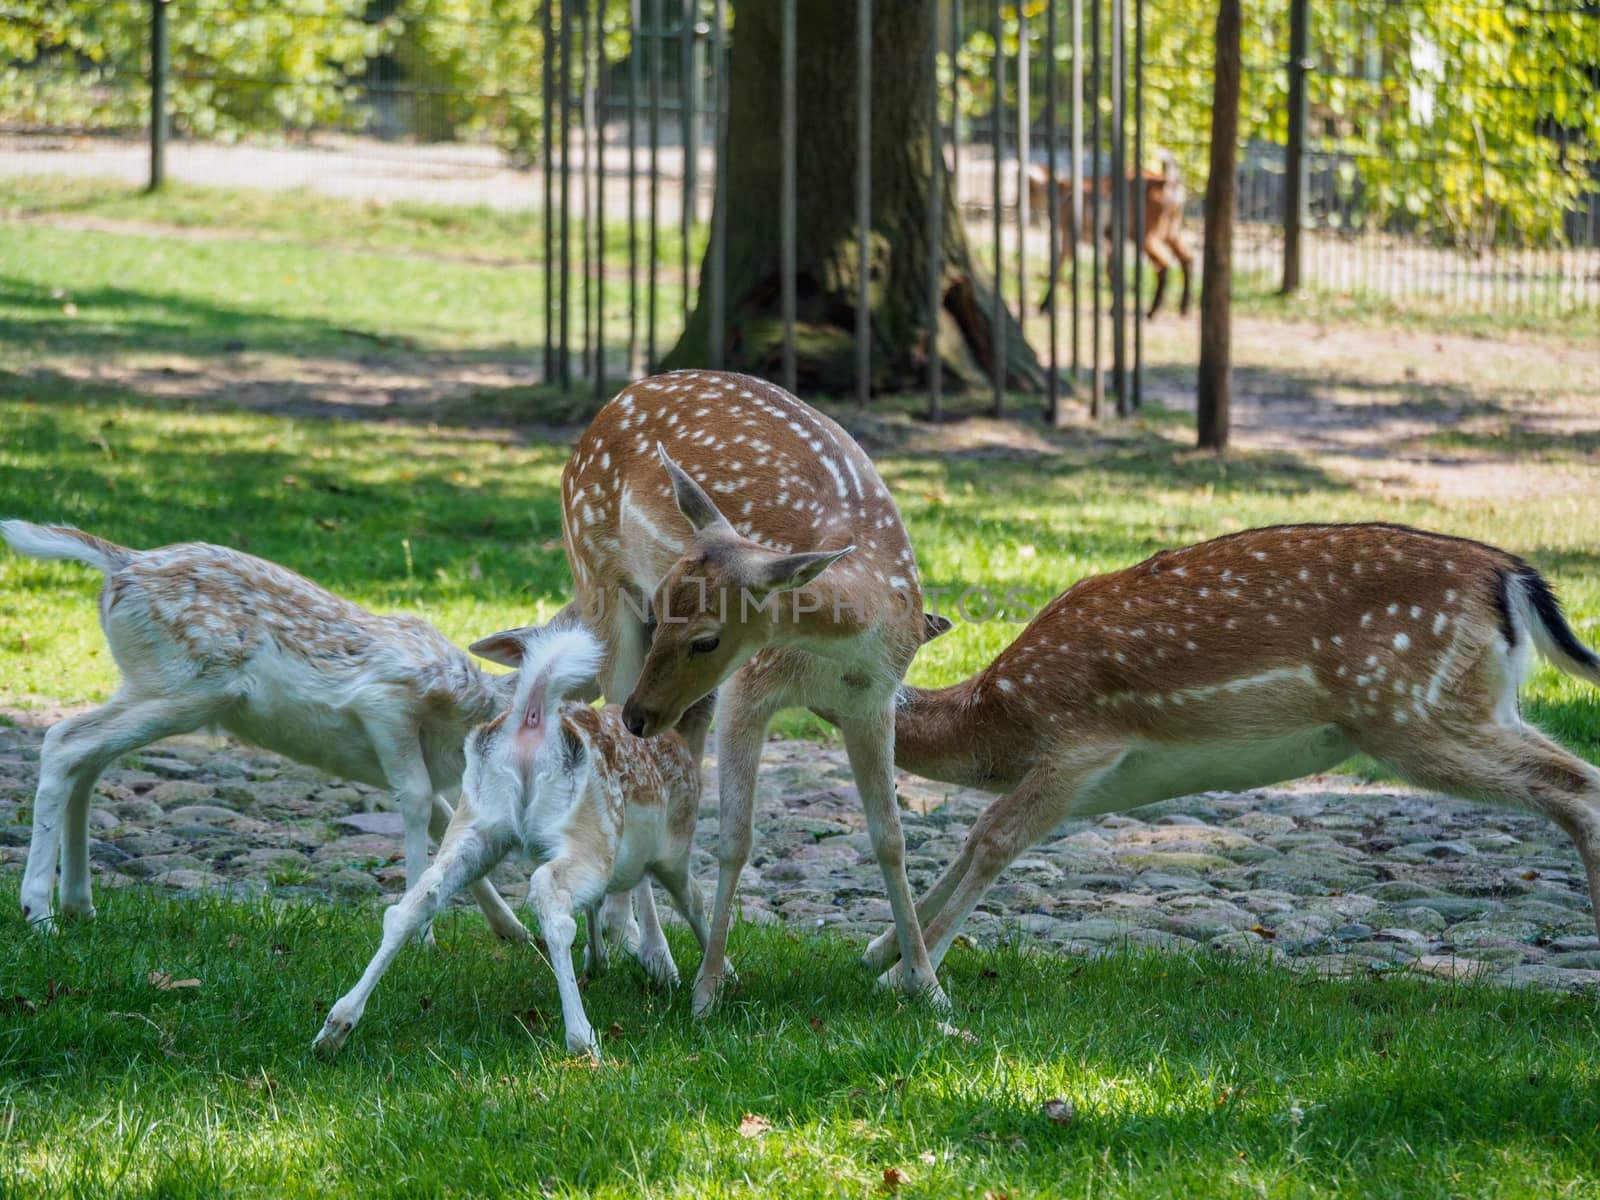 Multiple young and one adult deer drinking from a mother